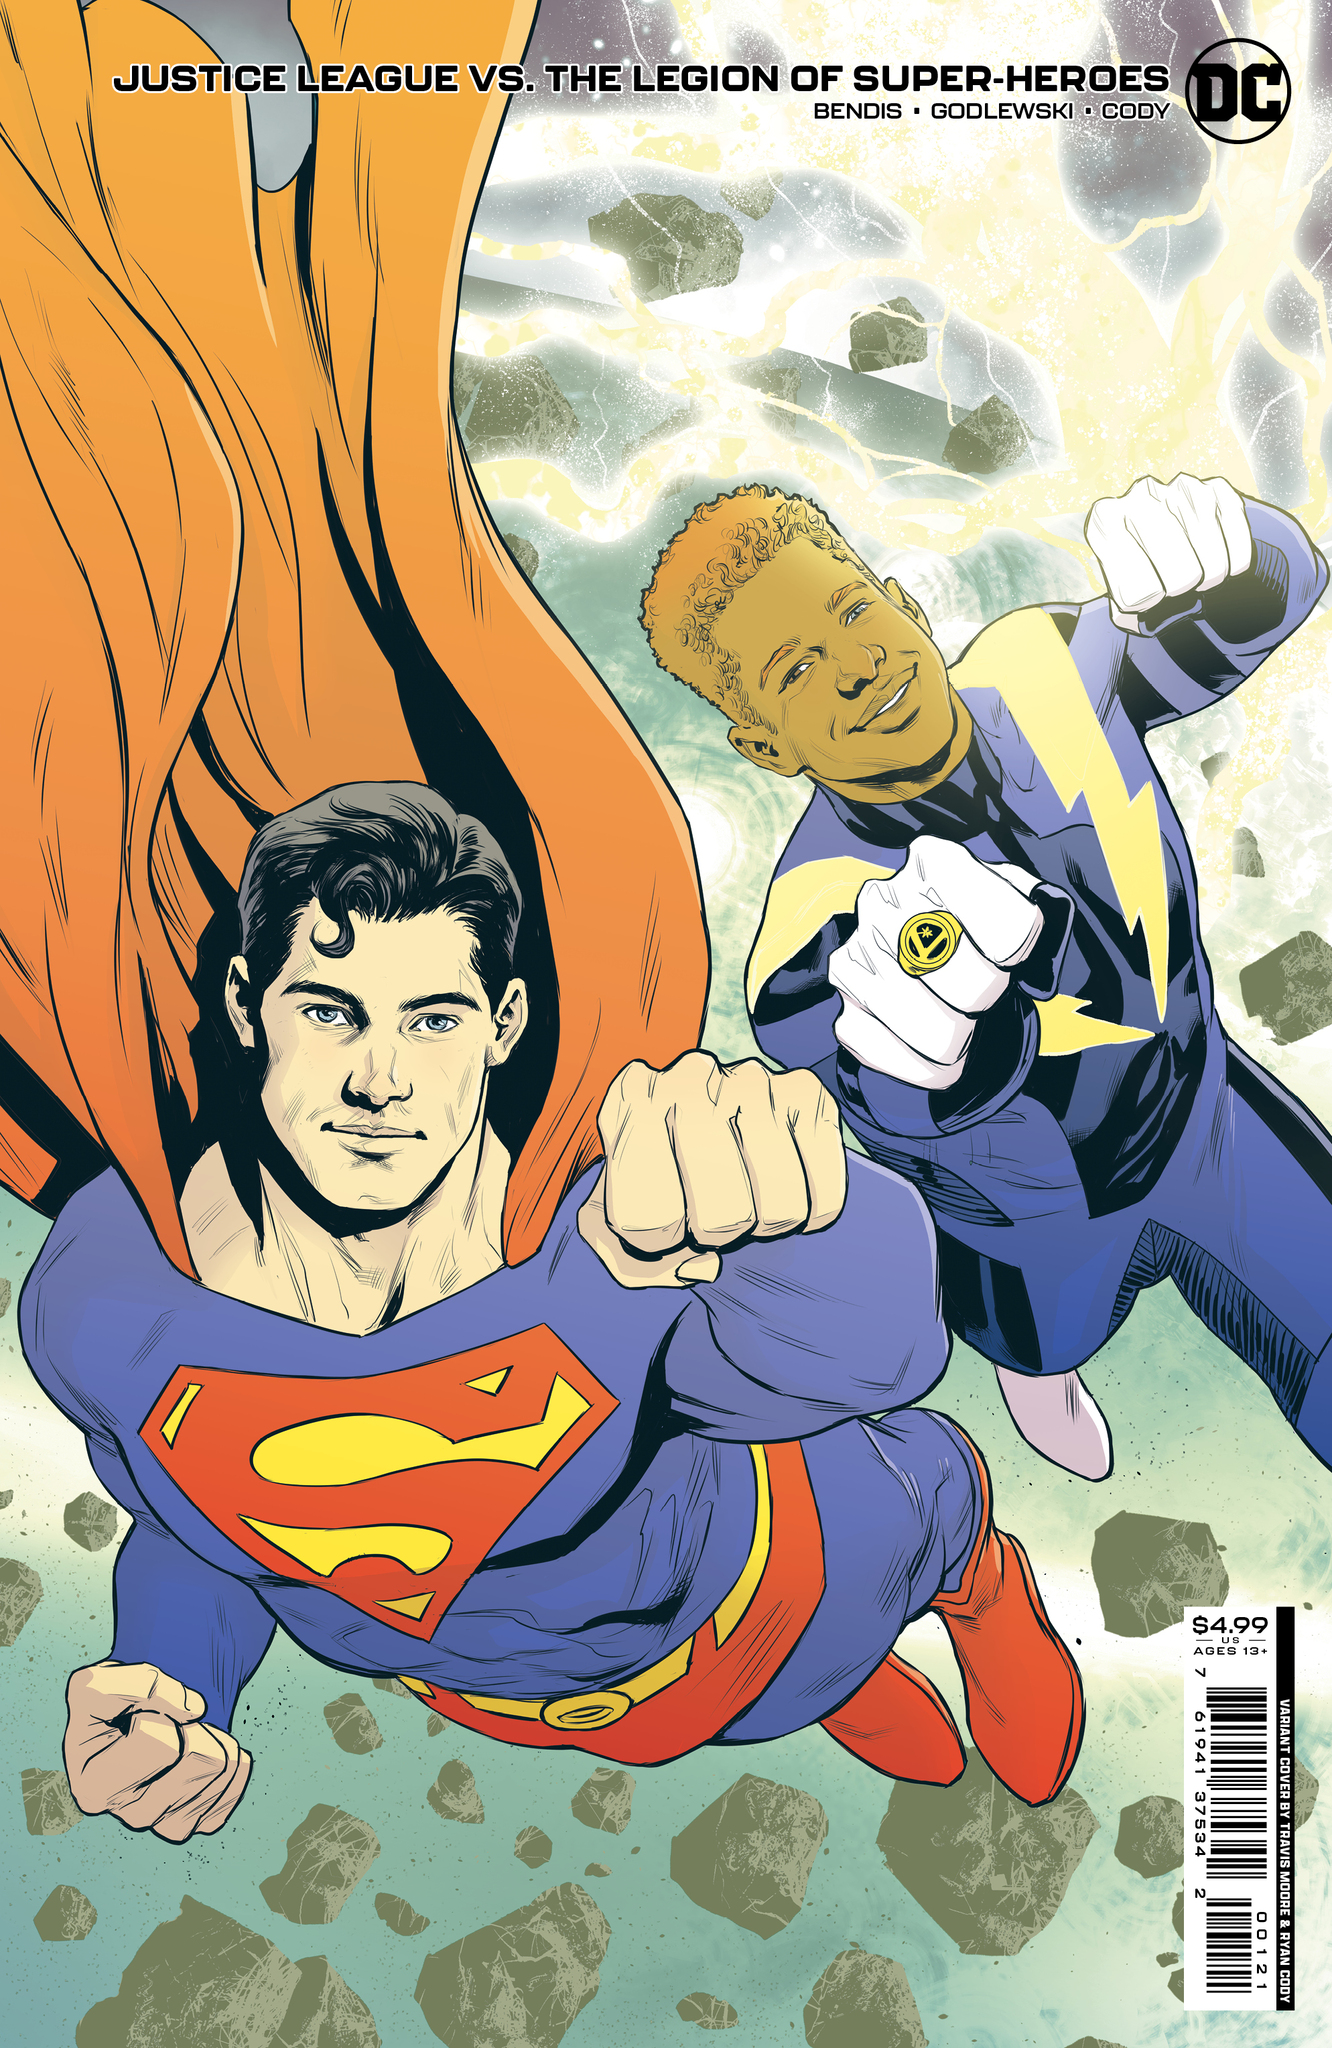 Justice League Vs The Legion of Super-Heroes #1 Cover B Travis Moore Card Stock Variant (Of 6)